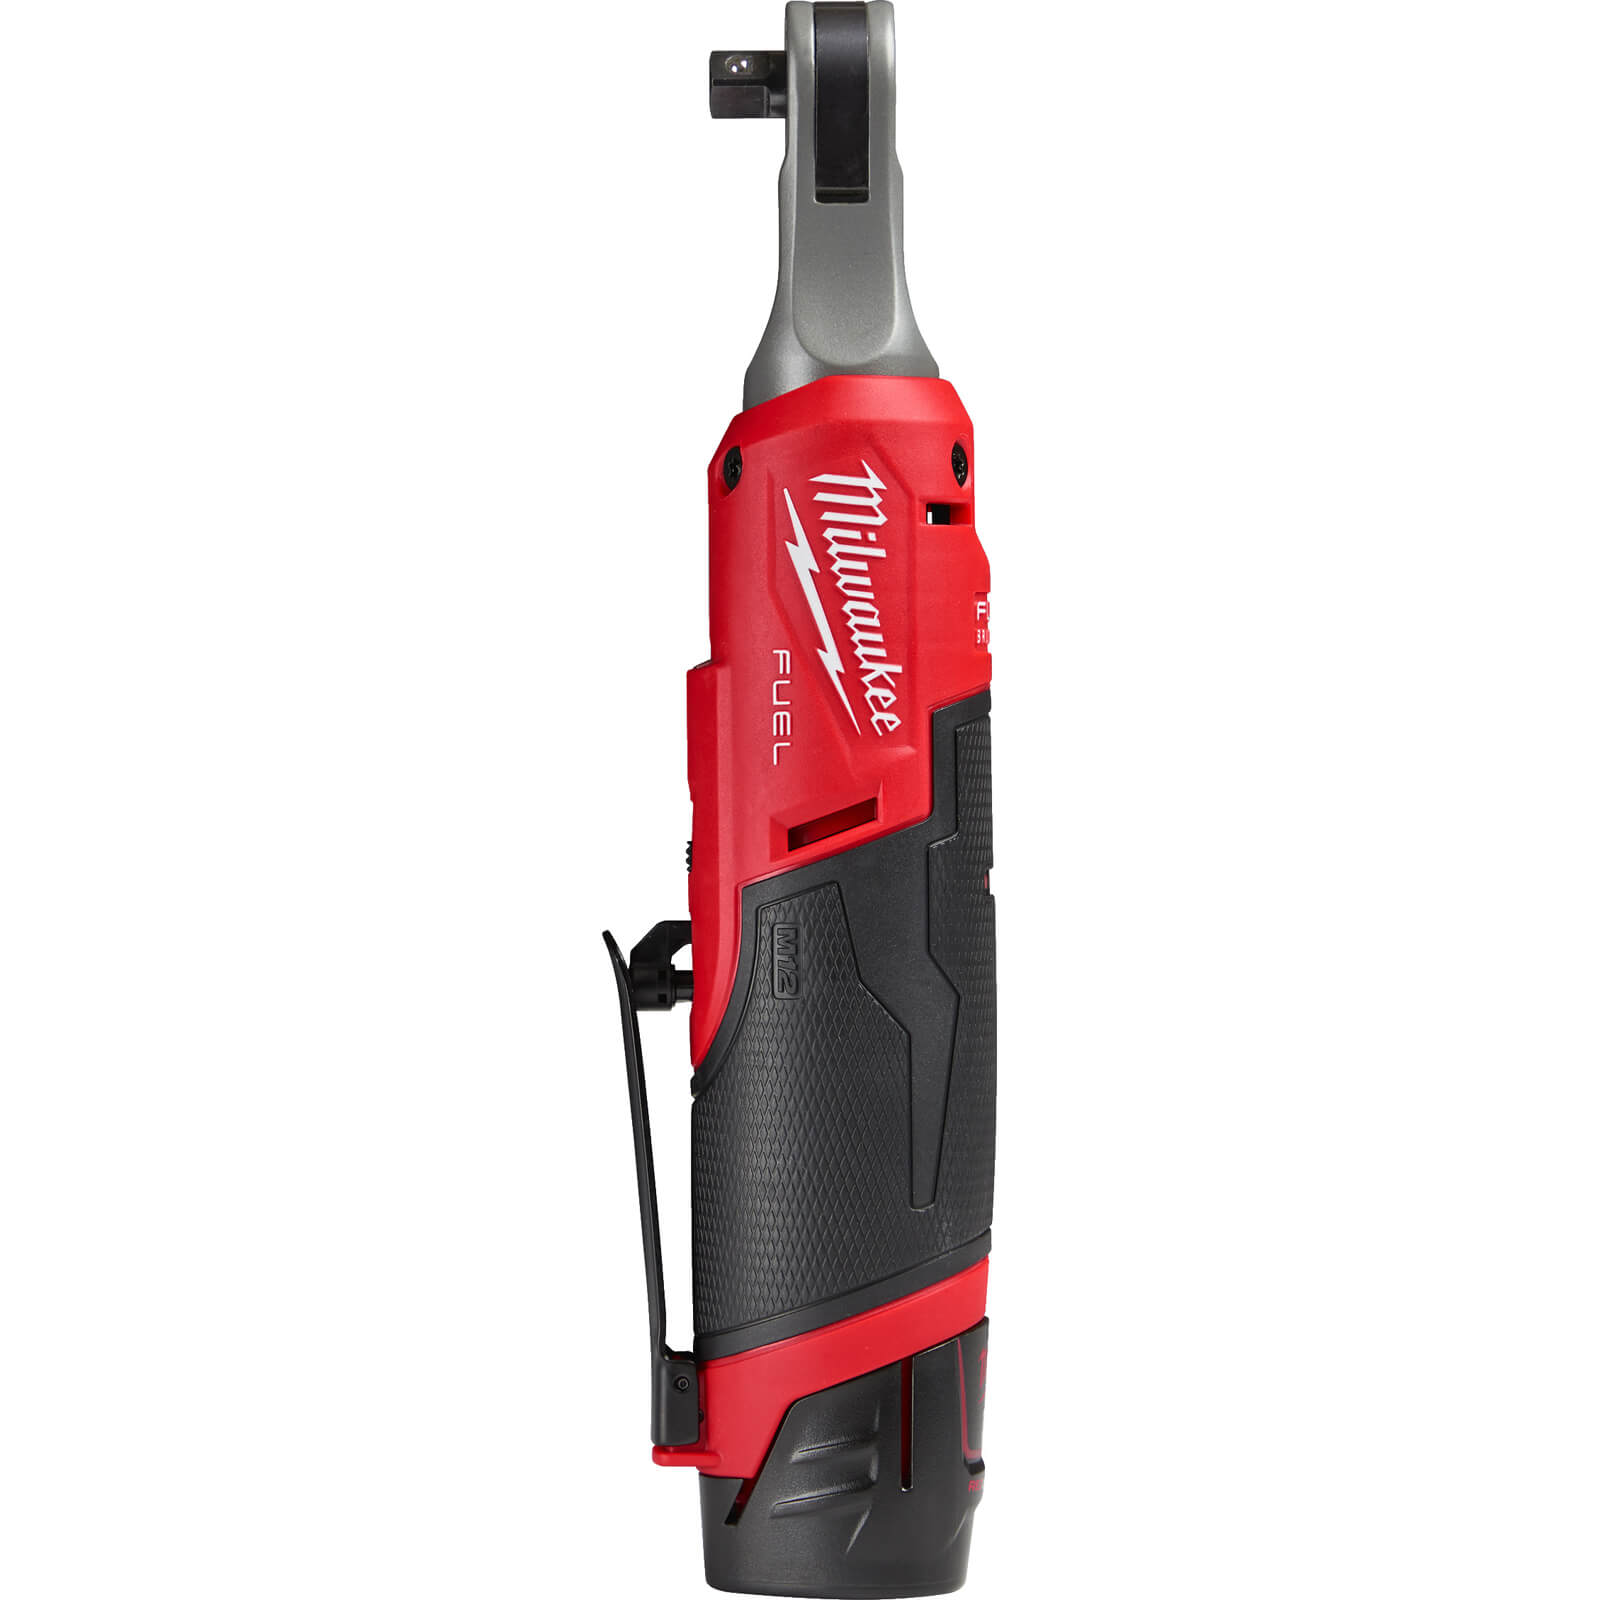 Image of Milwaukee M12 FHIR38 Fuel 12v Cordless Brushless 3/8" Drive Ratchet Wrench 1 x 2ah Li-ion Charger Bag